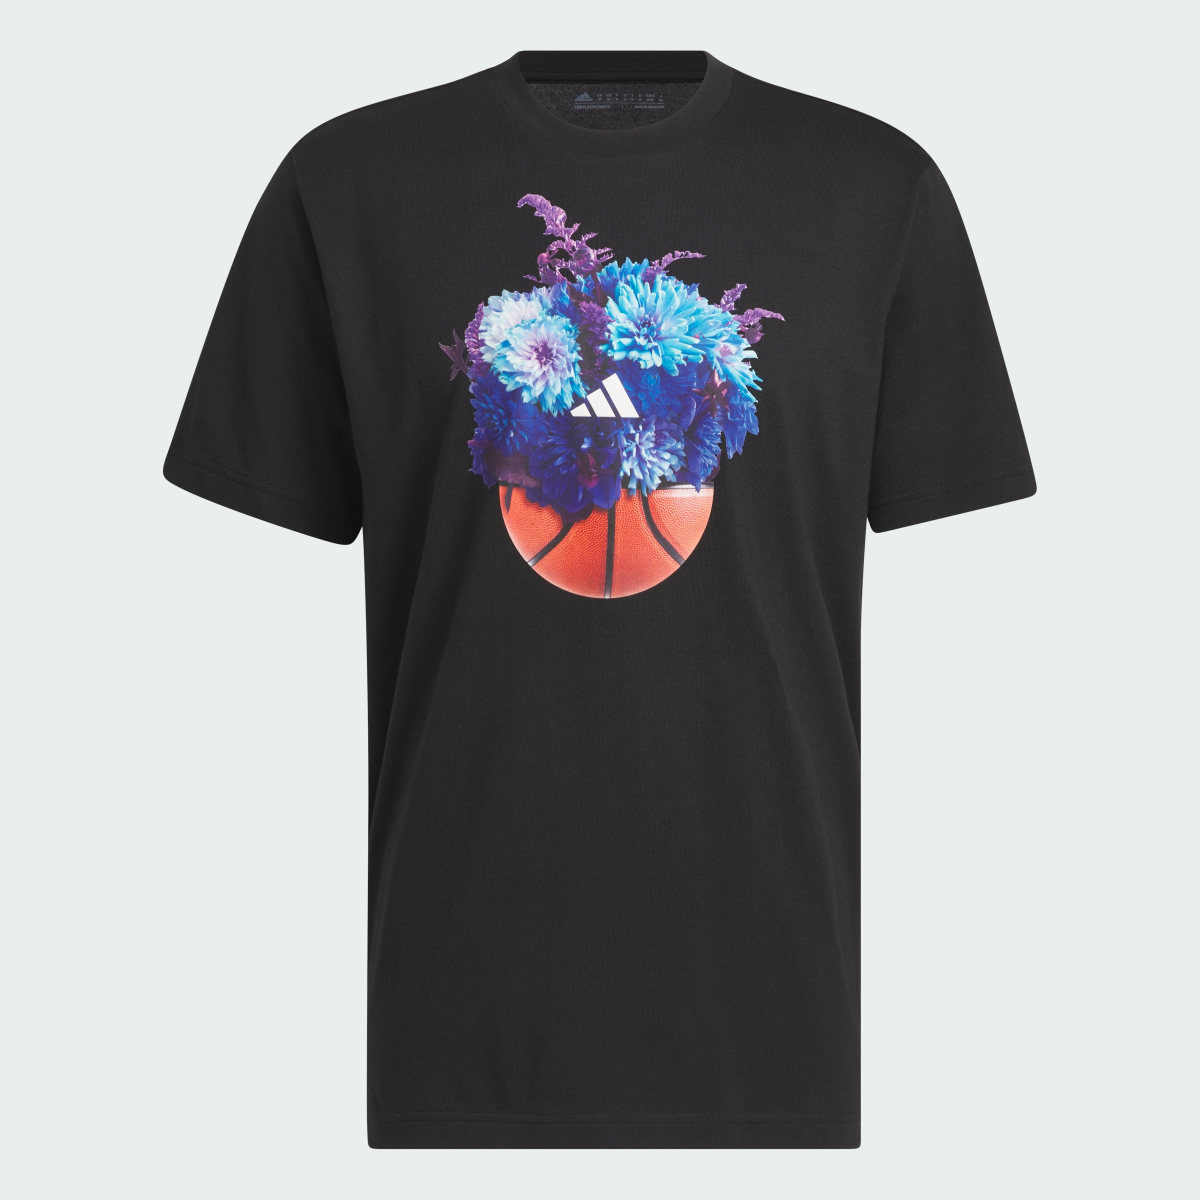 Adidas Floral Hoops Graphic Tee. 5